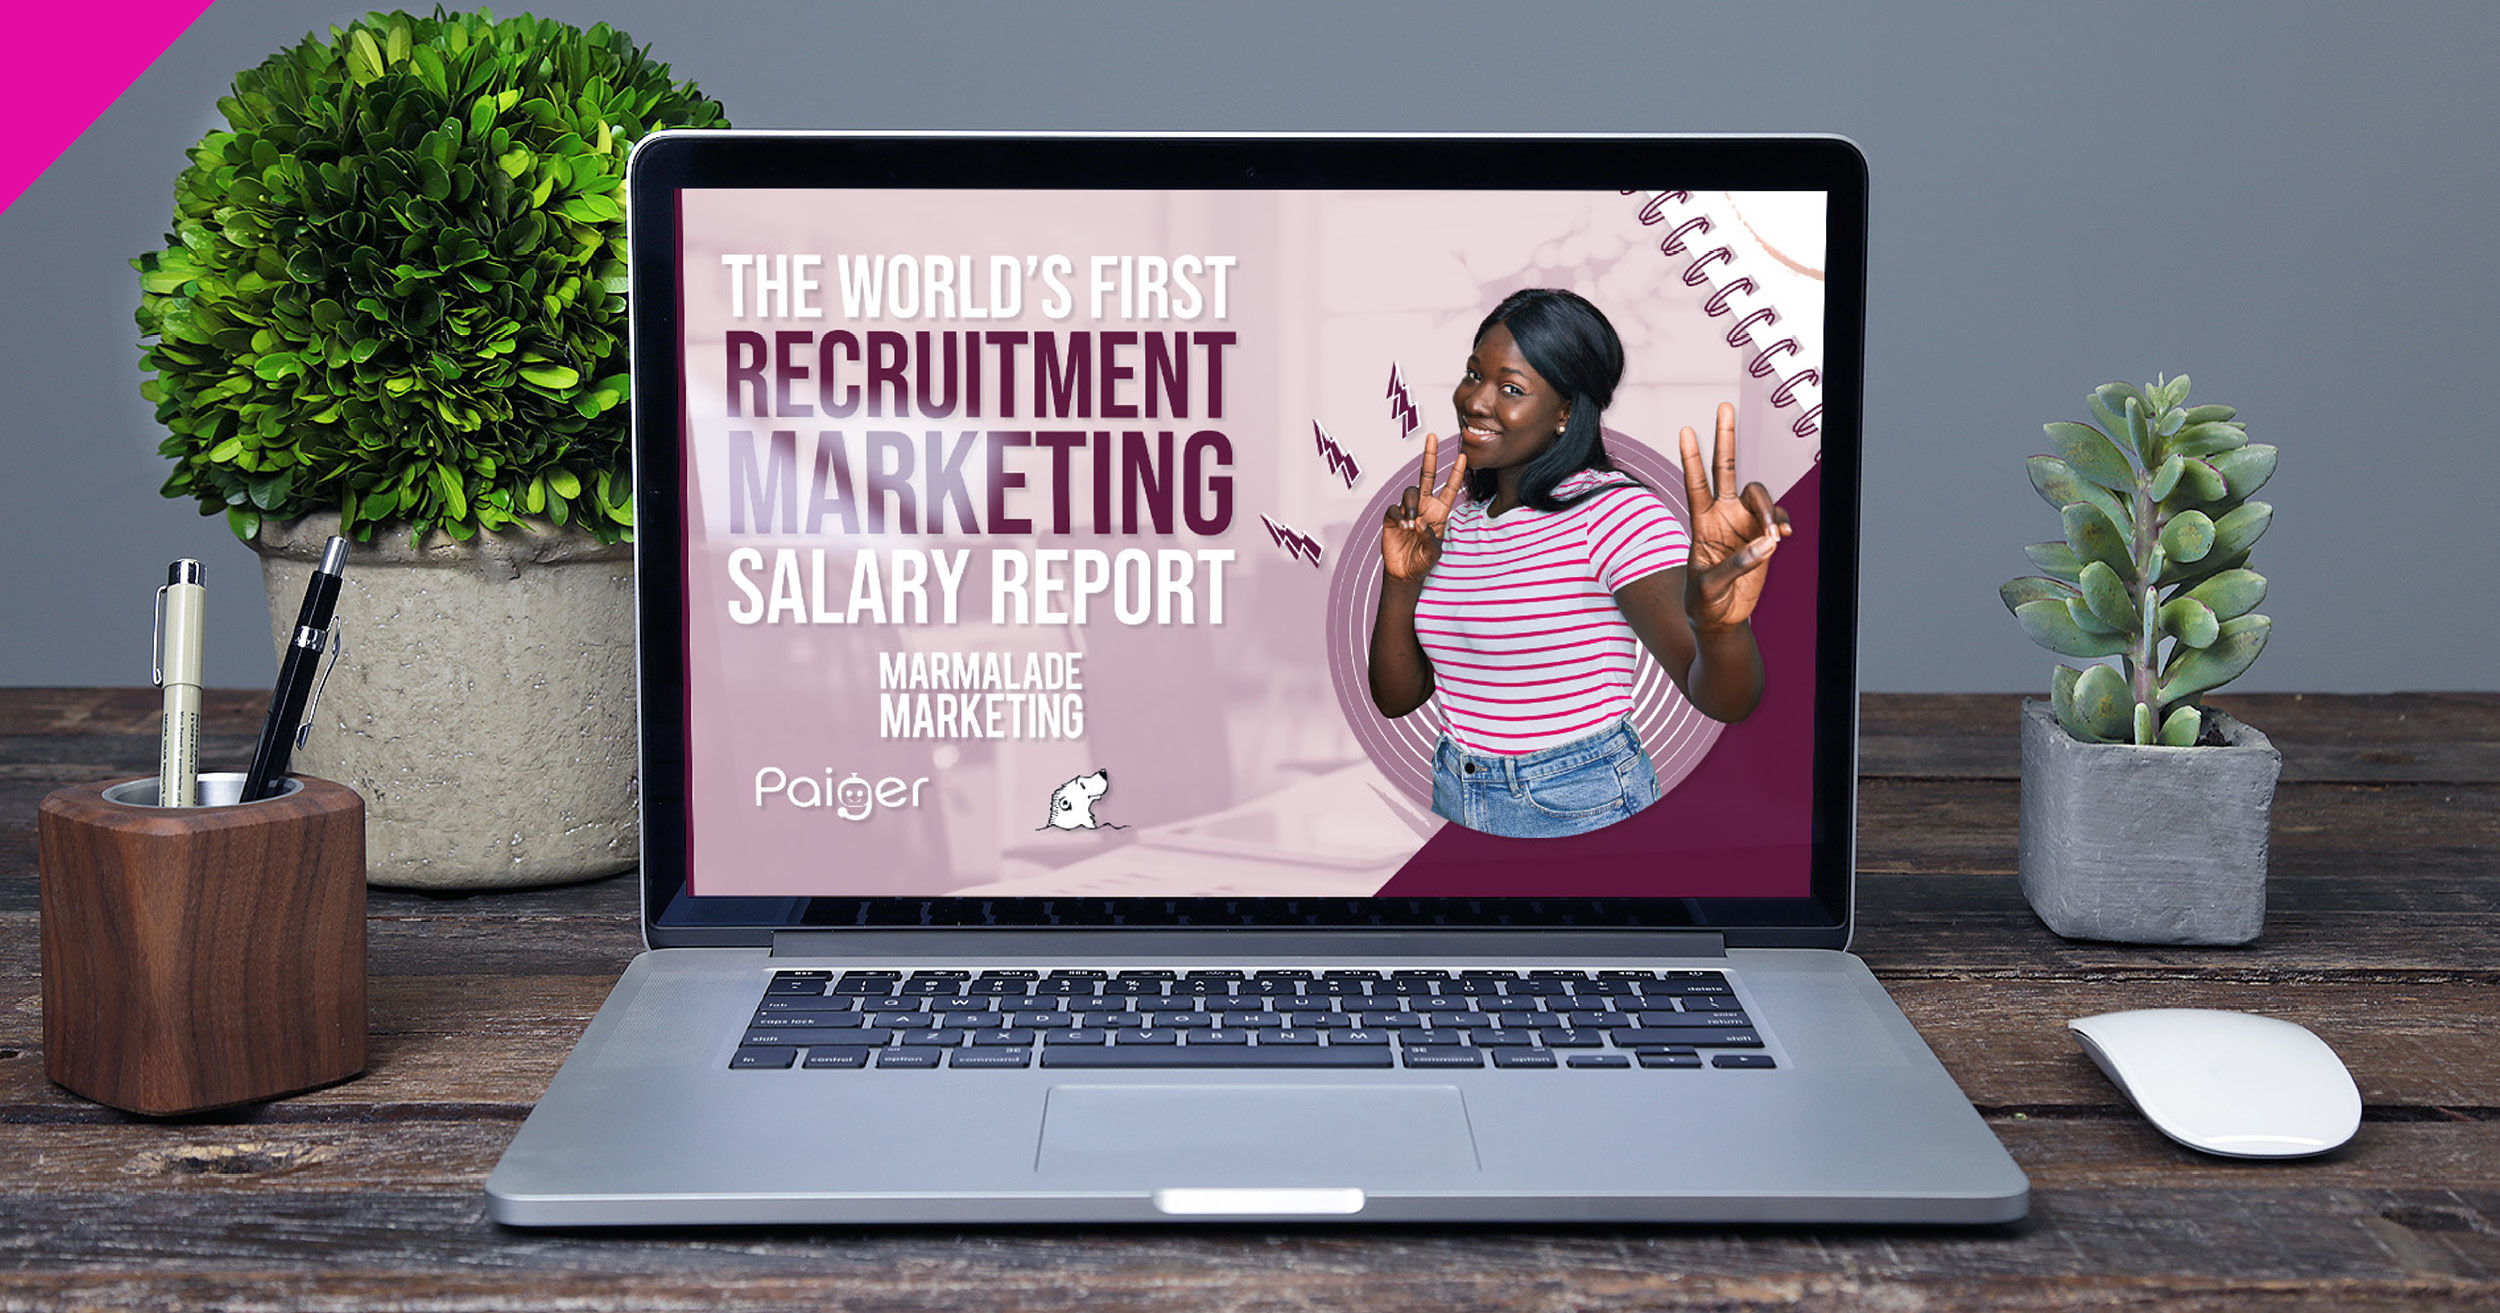 Introducing the World's First Recruitment Marketing Salary Report